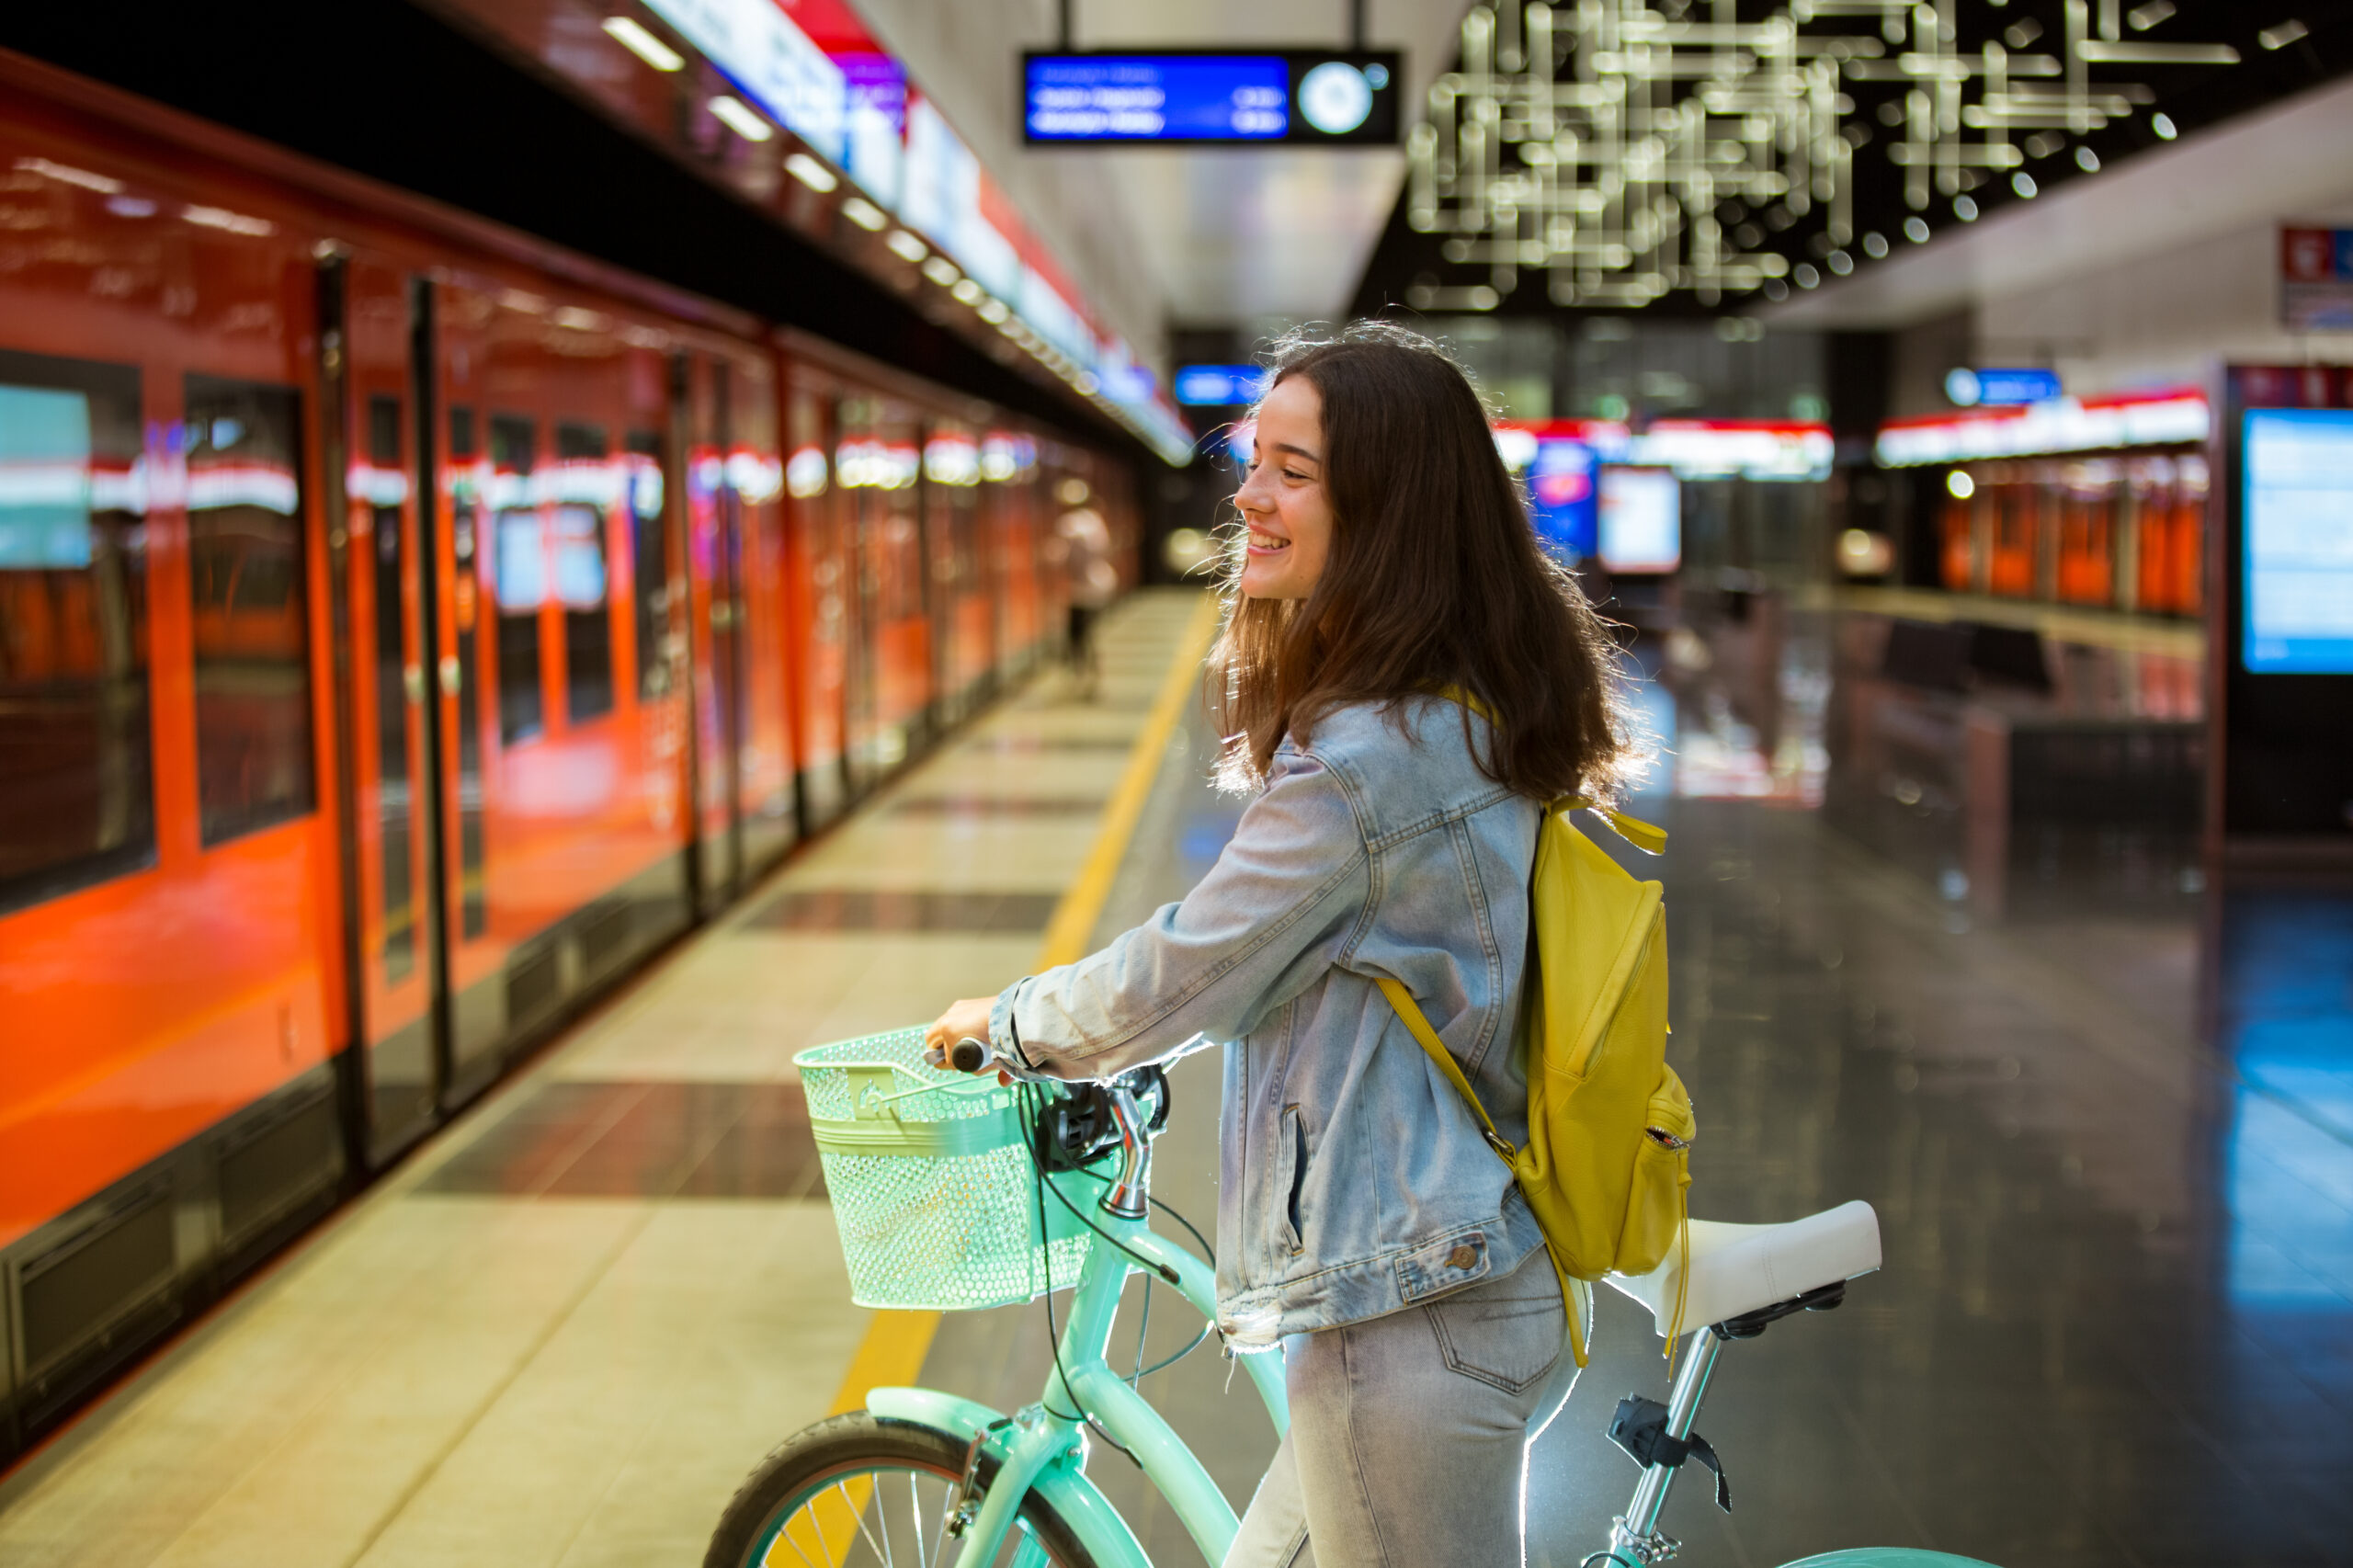 Teenager girl in jeans with yellow backpack and bike standing on